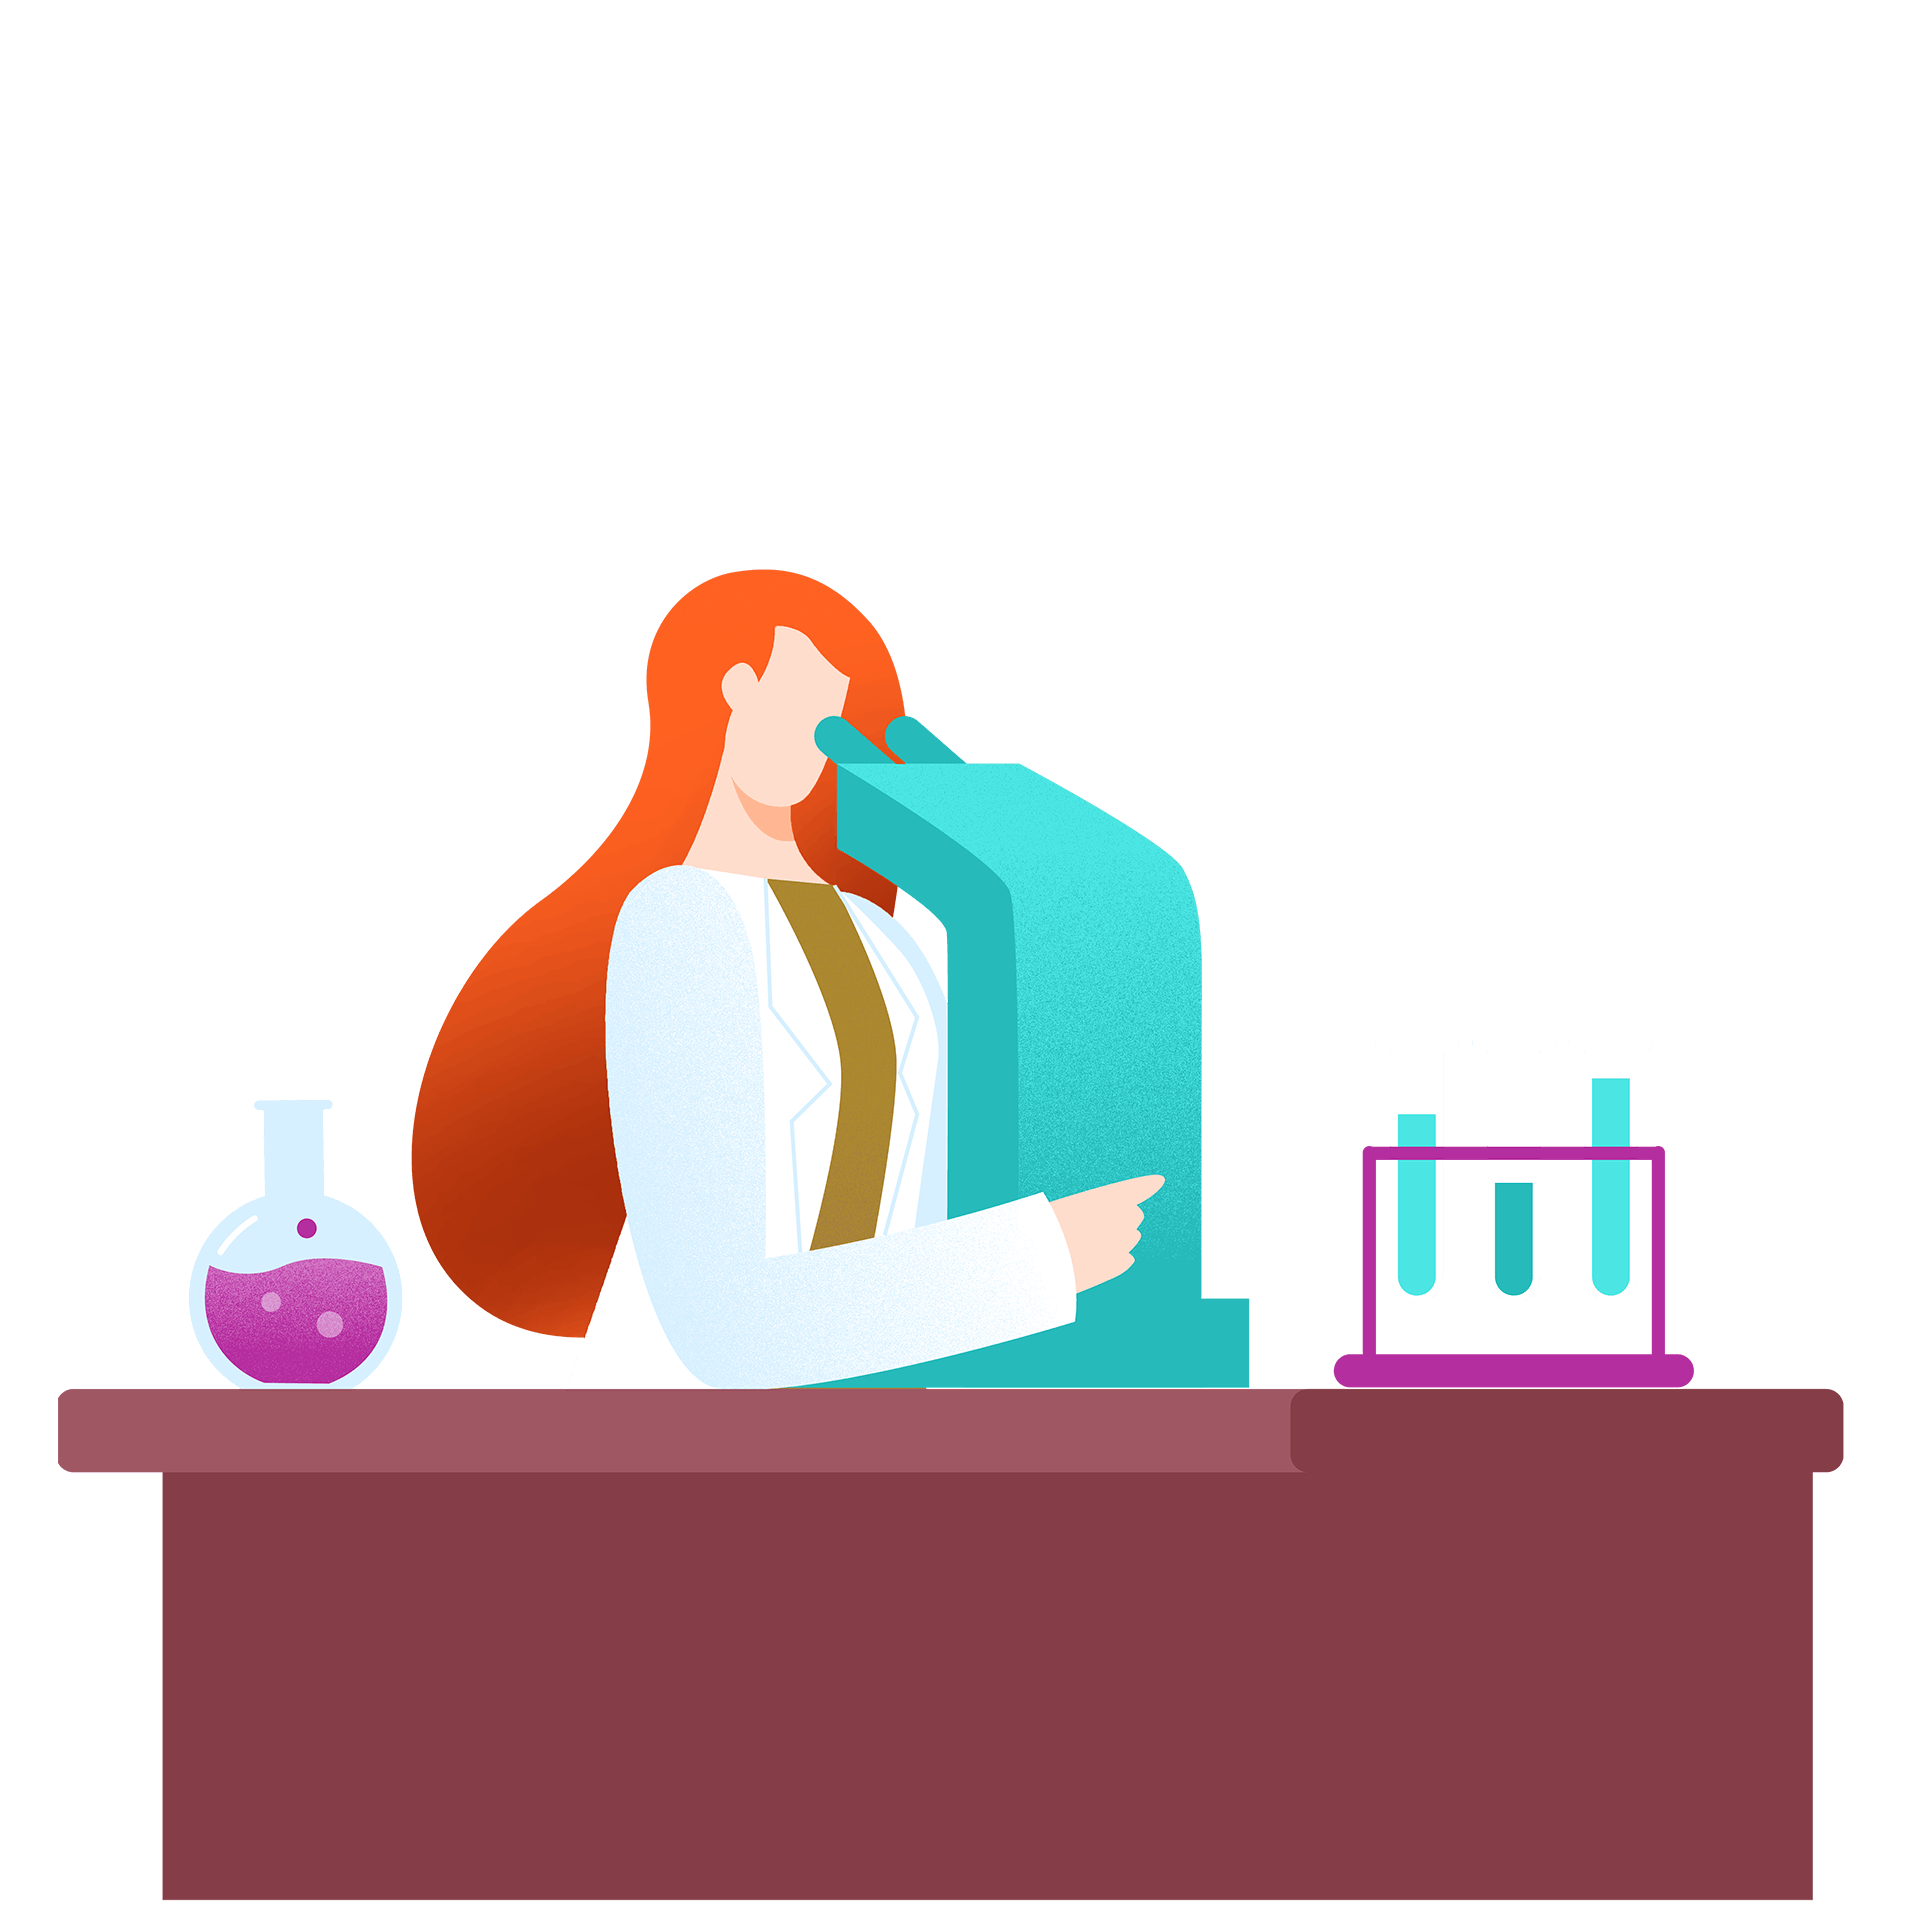 An illustration of a scientist looking into a microscope